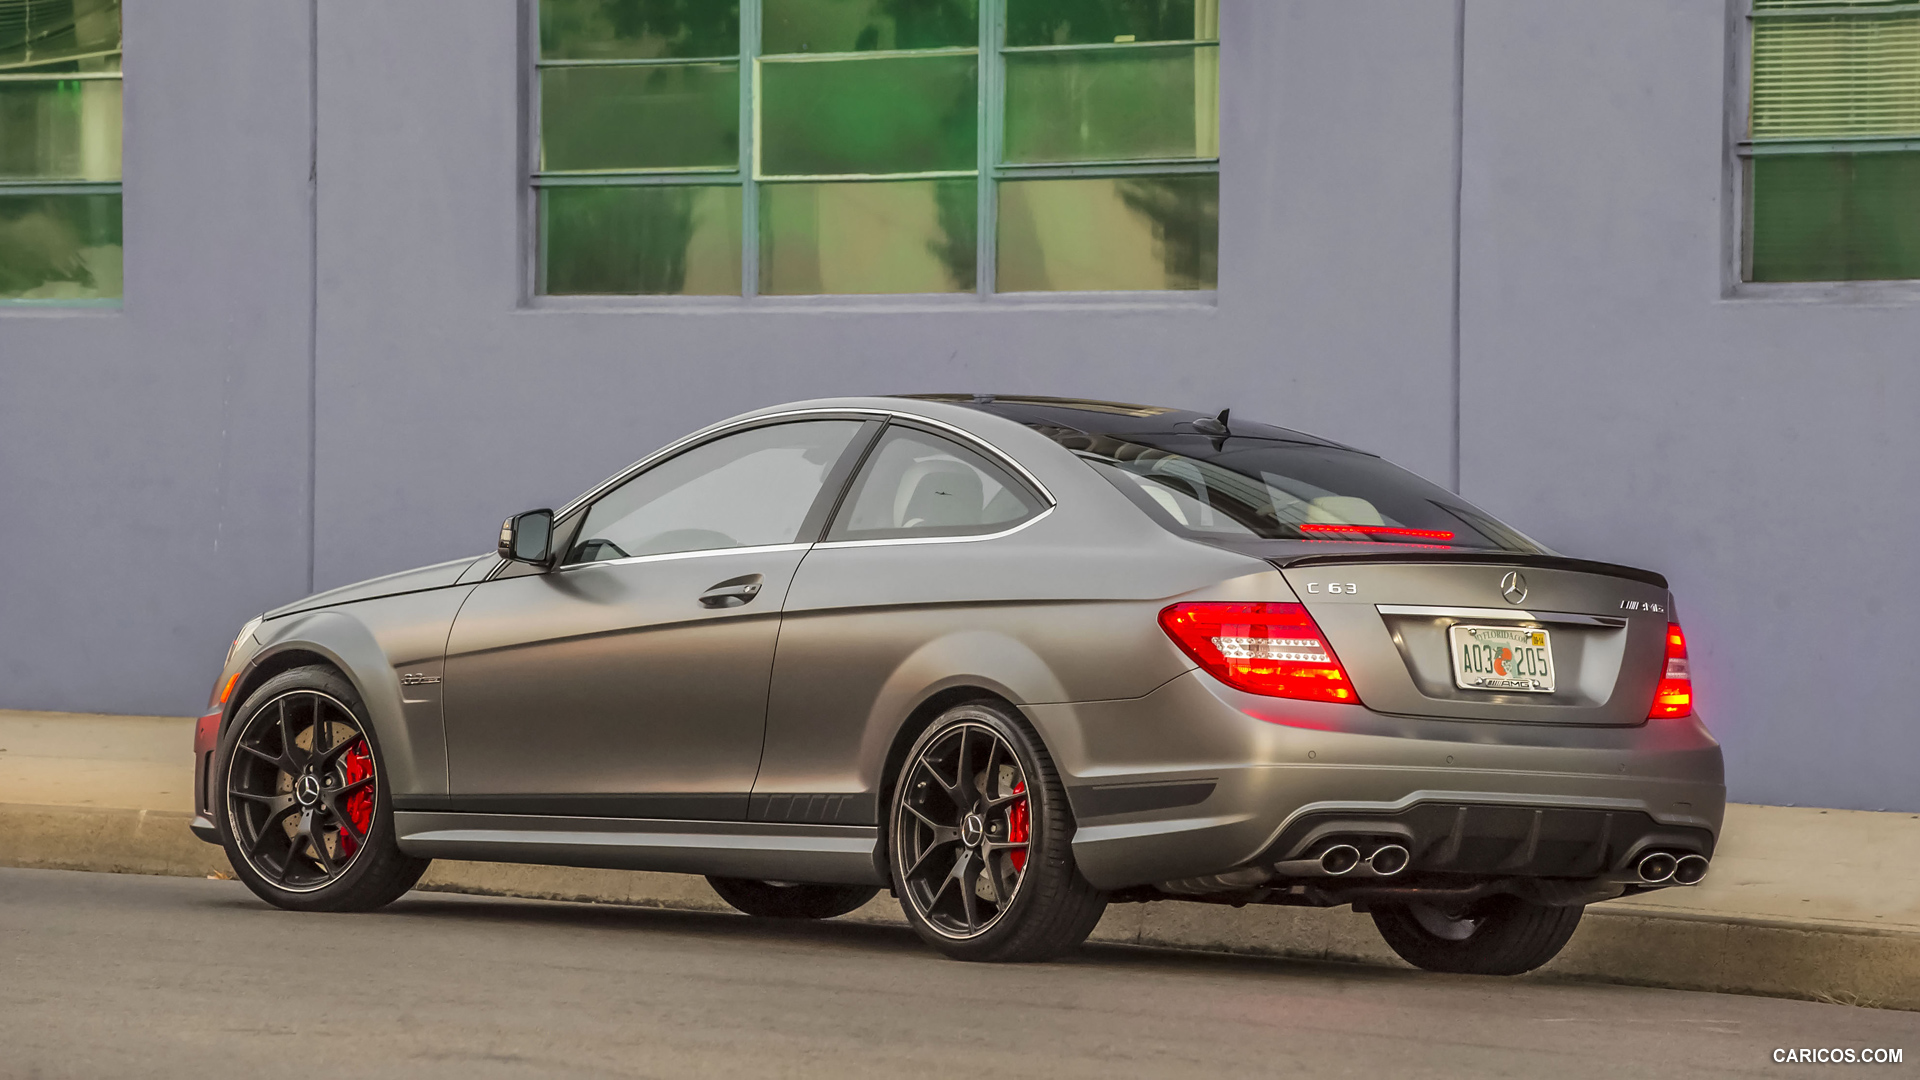 2014 Mercedes-Benz C 63 AMG Edition 507 Coupe (US Version)  - Rear, #2 of 14